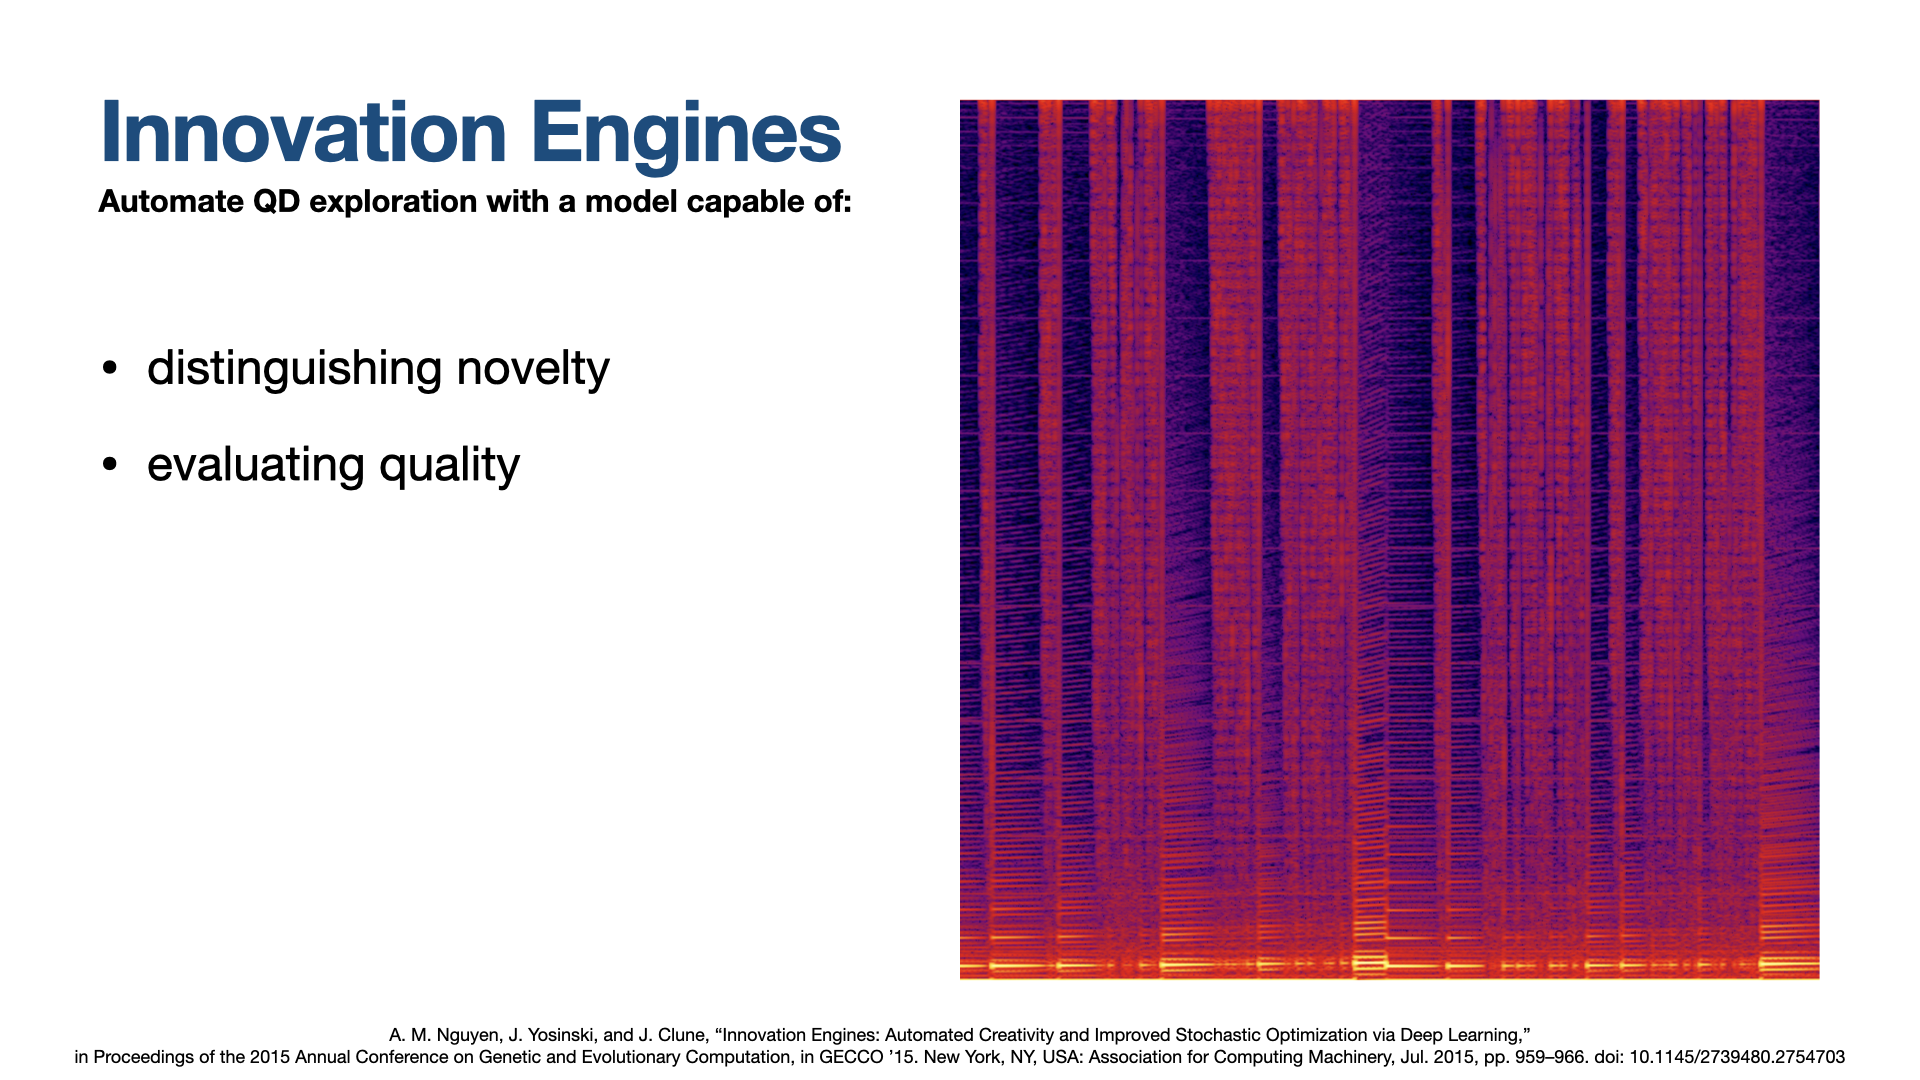 Innovation Engines. Automate QD exploration with a model capable of: distinguishing novelty, evaluating quality 